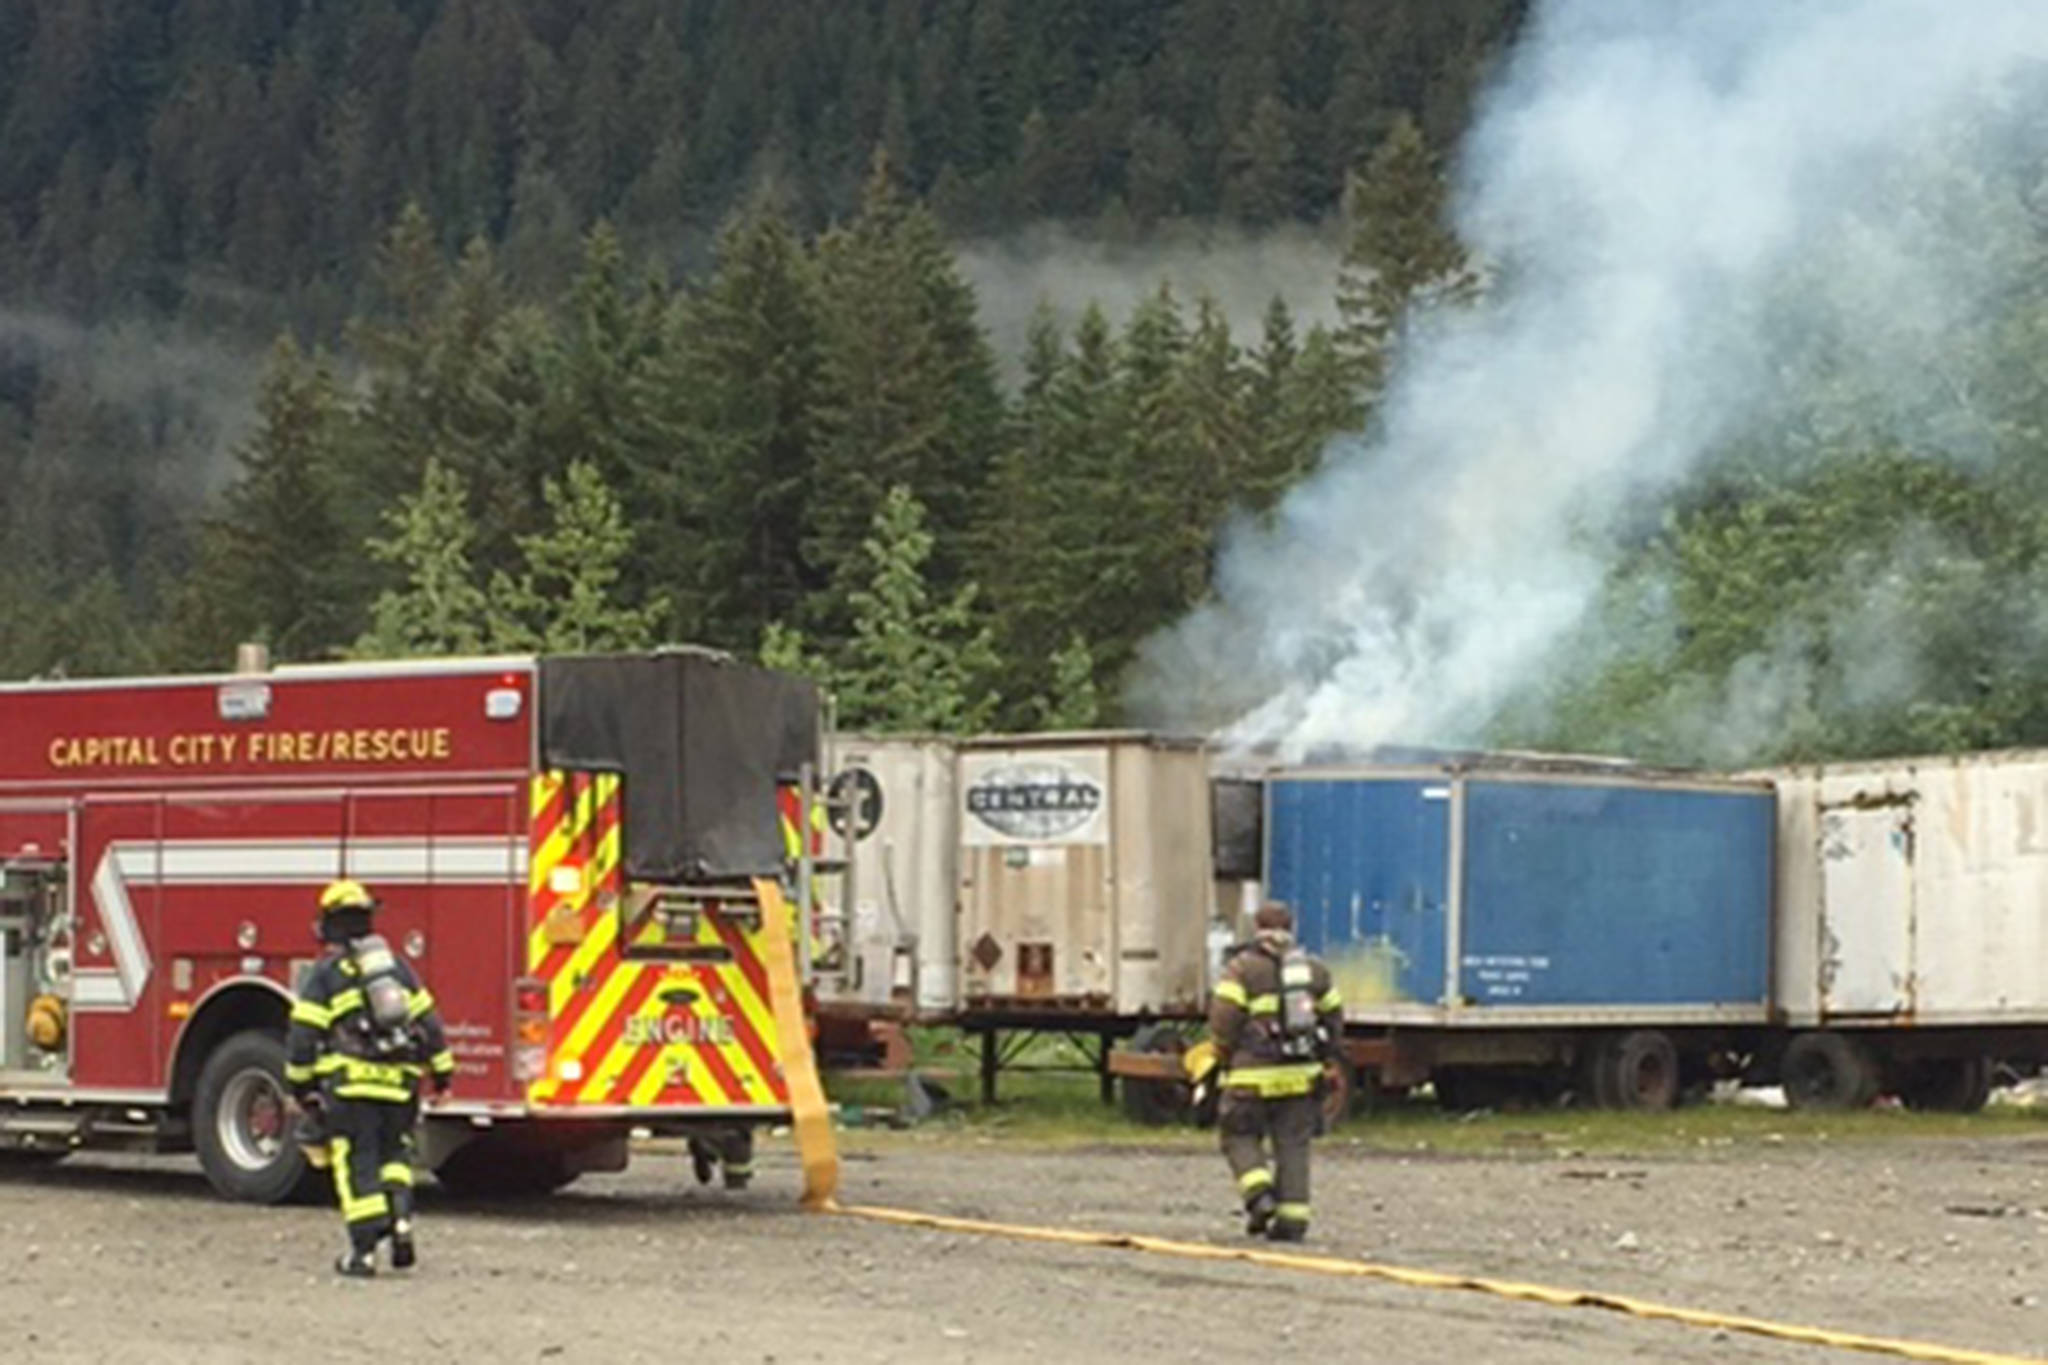 Capital City Fire/Rescue personnel respond to a fire in storage containers on Valley Boulevard on Monday, June 17, 2019. (Courtesy photo | Ed Quinto, Capital City Fire/Rescue)